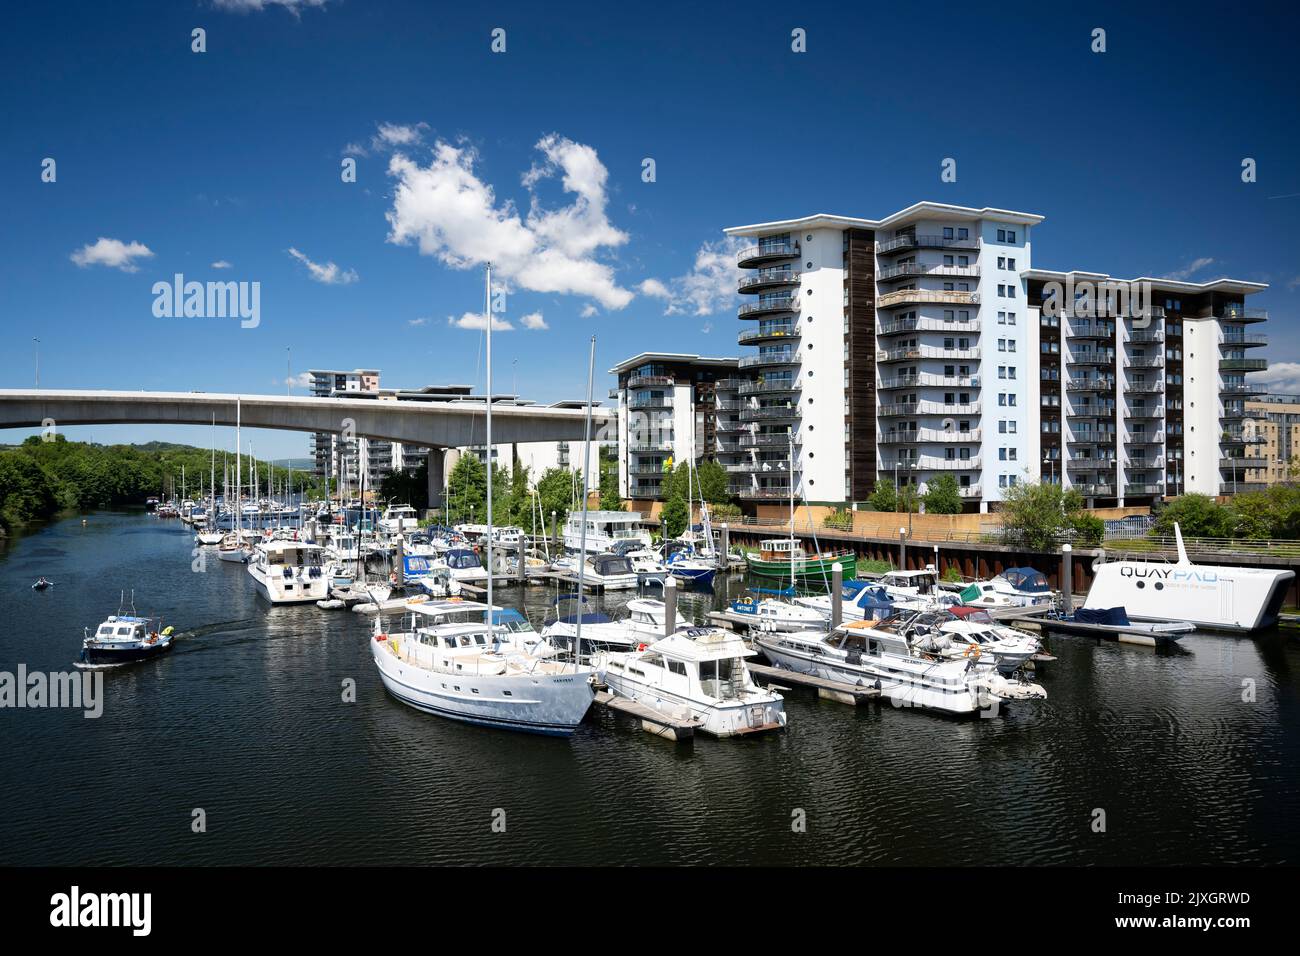 Boats against a blue sky near the Atlantic Wharf flats in the River Ely in Cardiff, Wales, United Kingdom. Stock Photo